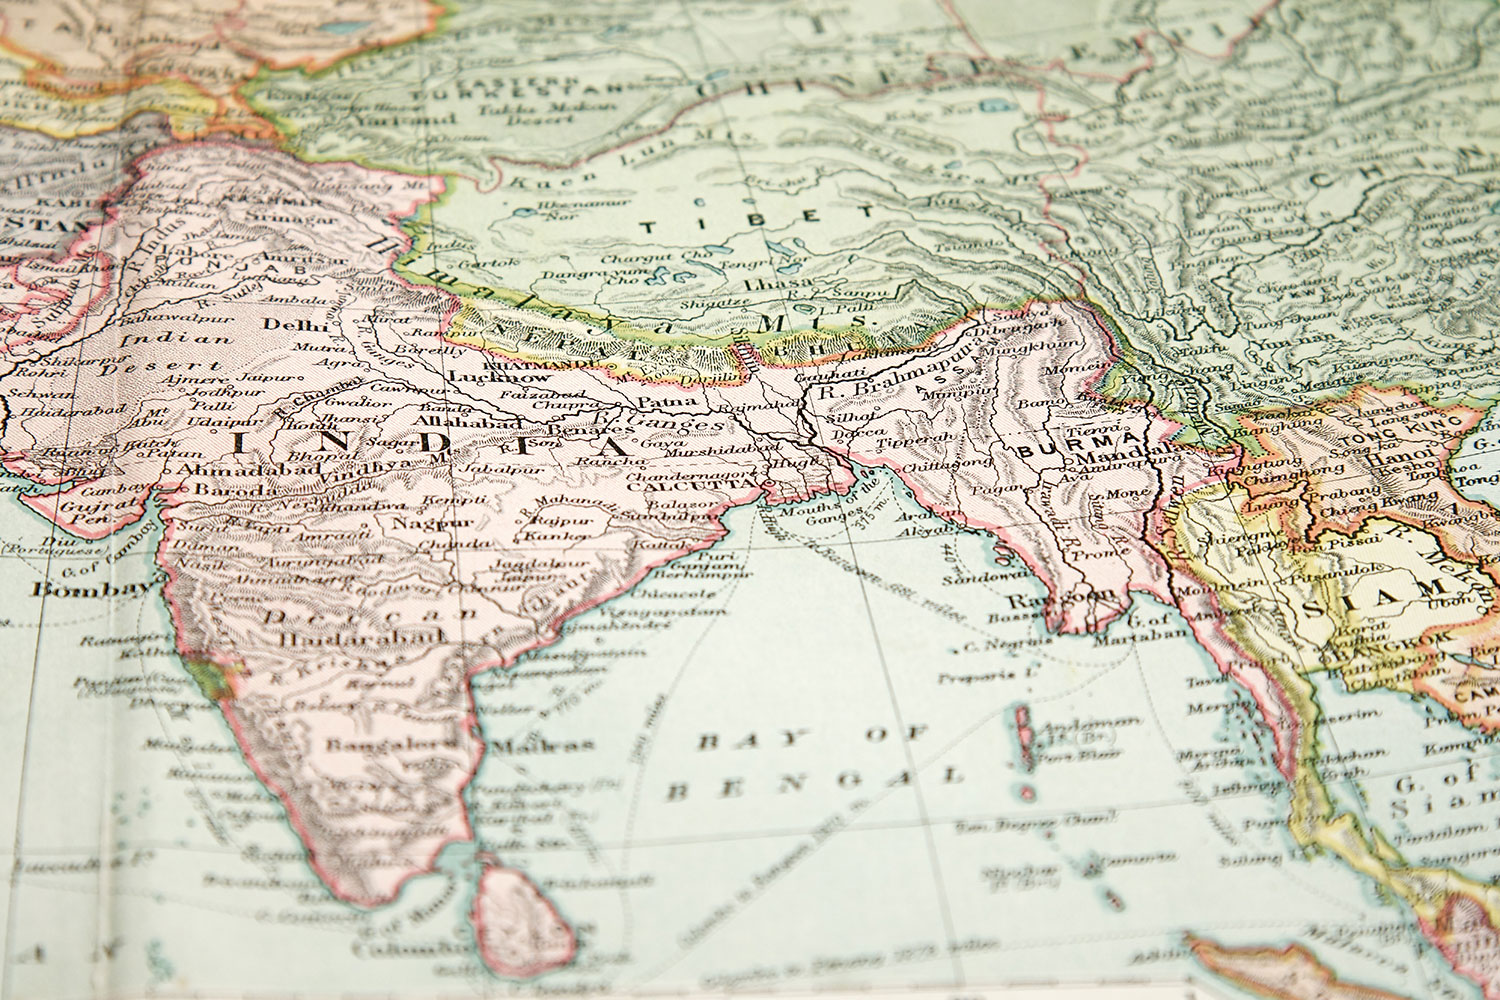 India Perspective - India Map Perspective - HD Wallpaper 